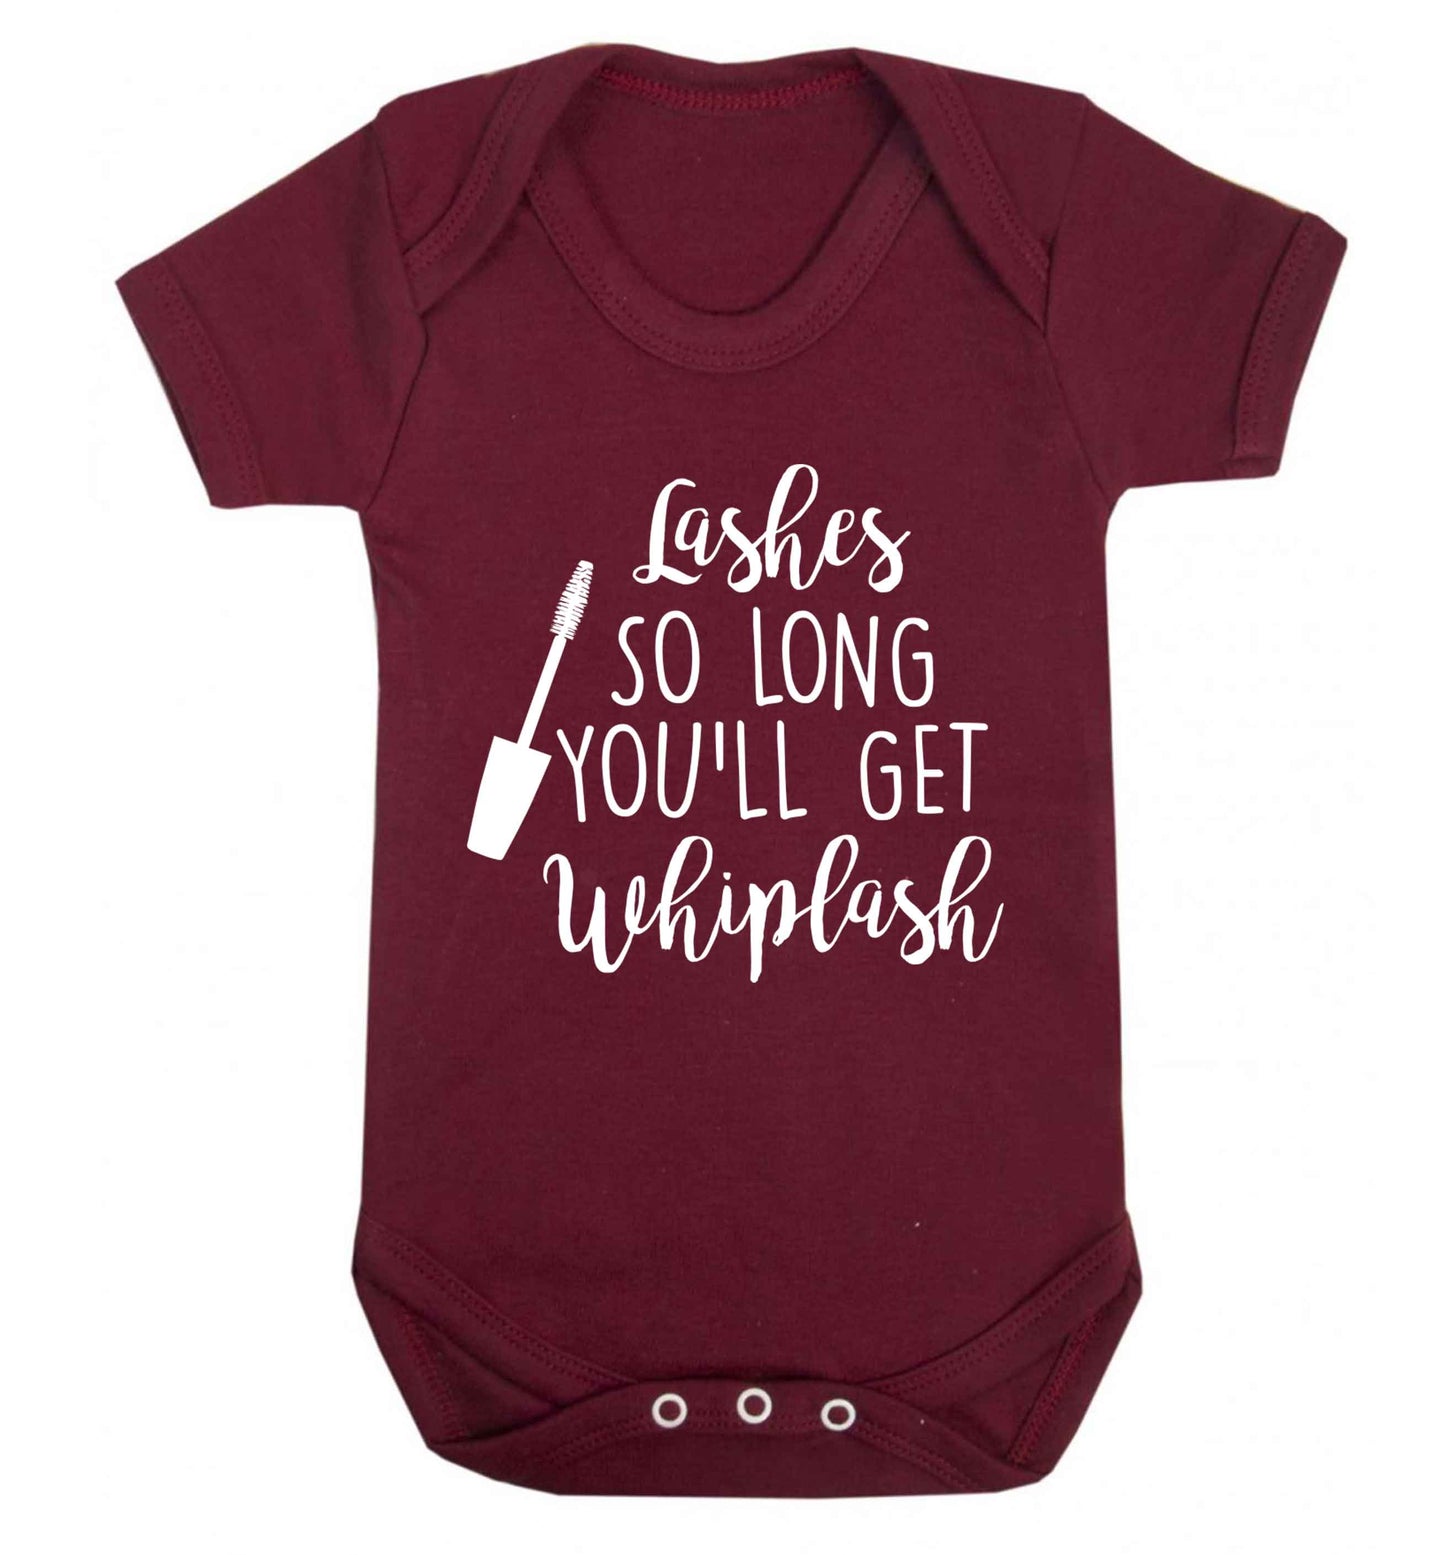 Lashes so long you'll get whiplash Baby Vest maroon 18-24 months